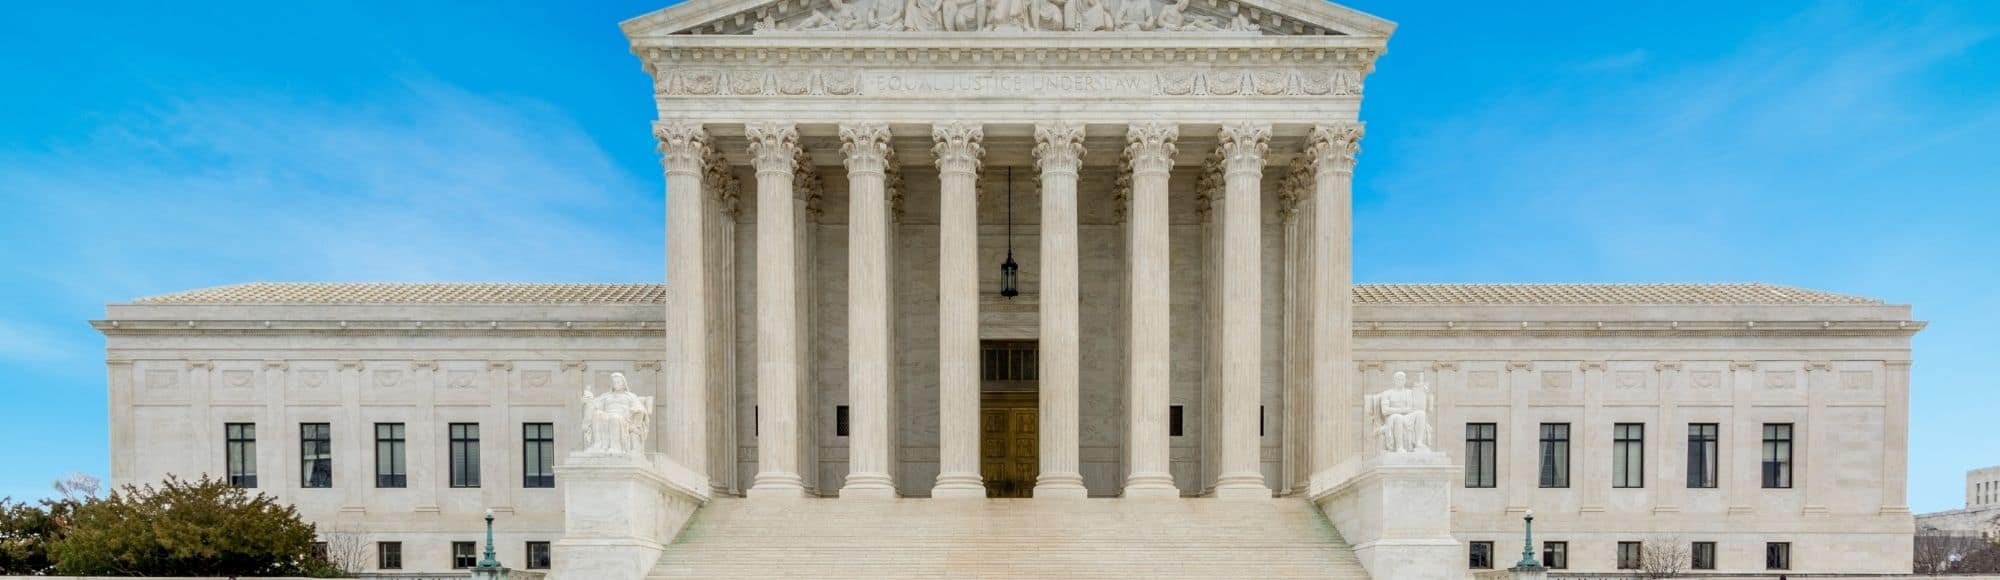 How to Tour the Supreme Court and Attend Lectures and Cases